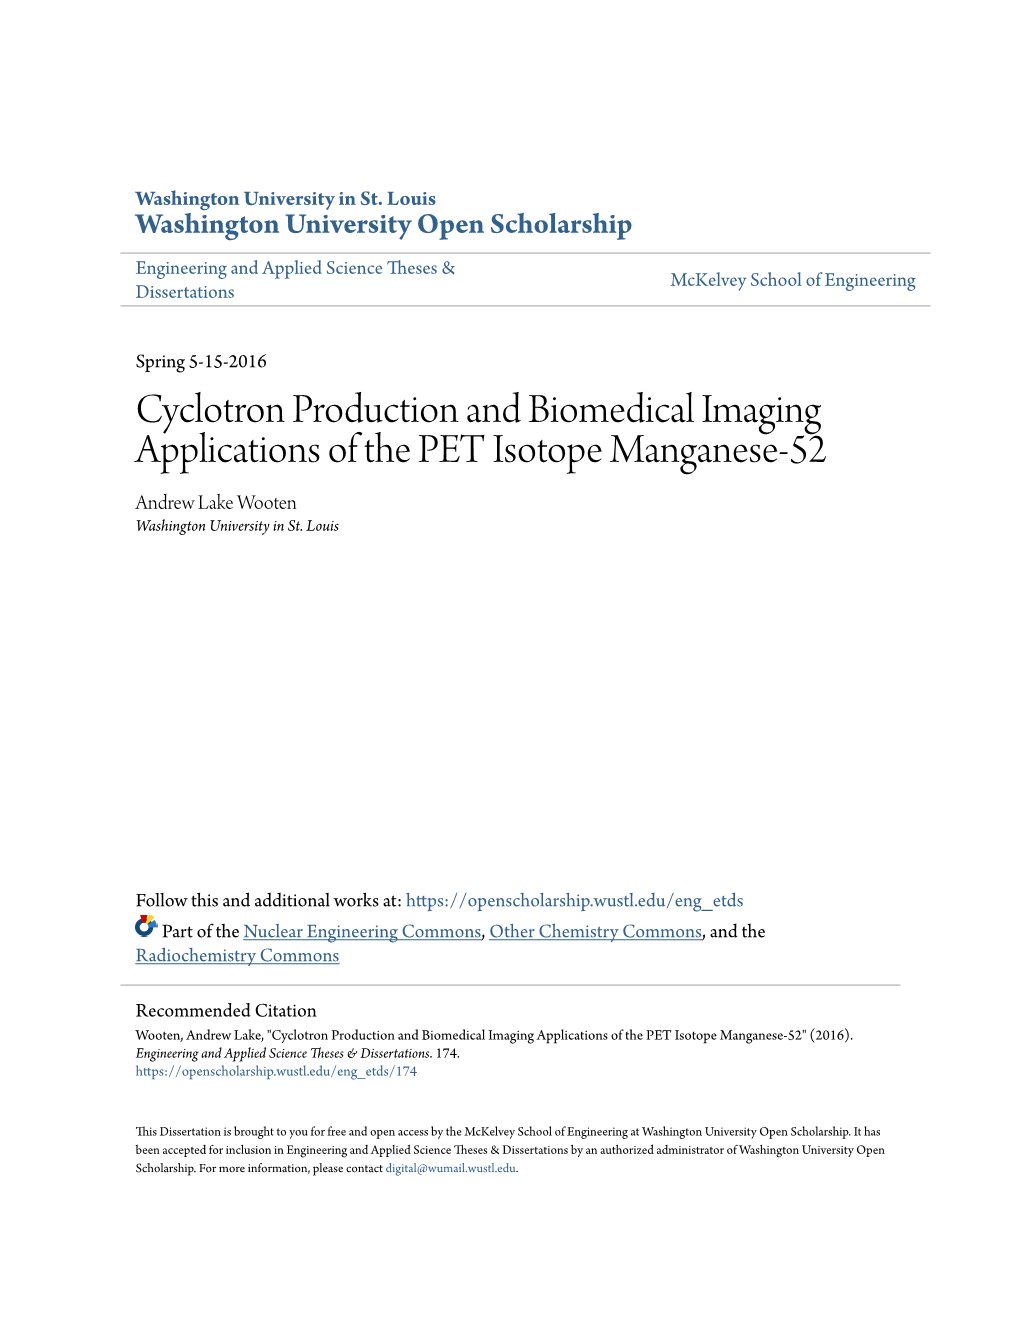 Cyclotron Production and Biomedical Imaging Applications of the PET Isotope Manganese-52 Andrew Lake Wooten Washington University in St